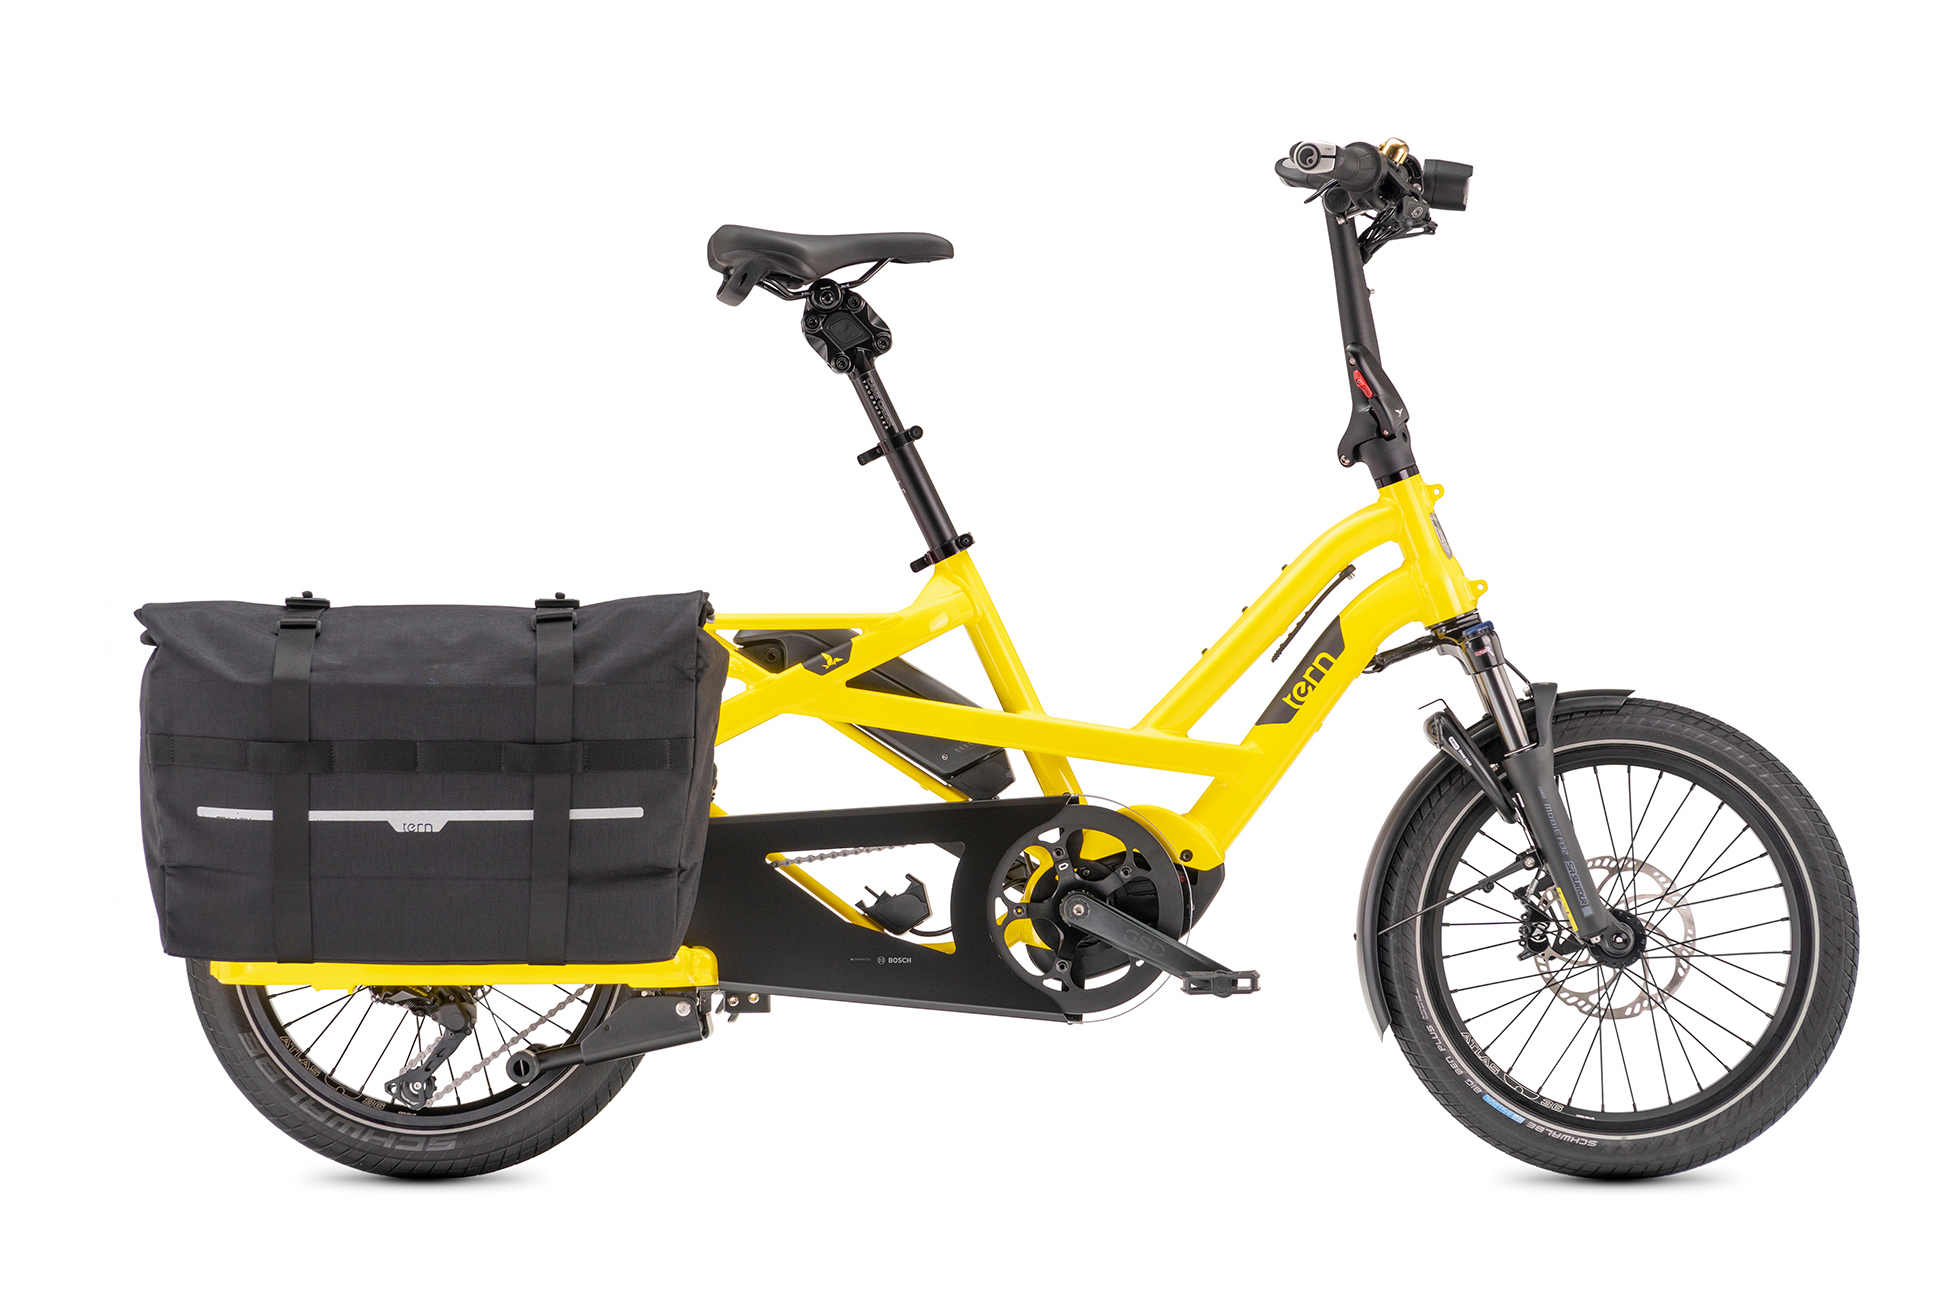 Cargo Hold 52 Panniers: Bike Bags for the GSD | Tern Bicycles